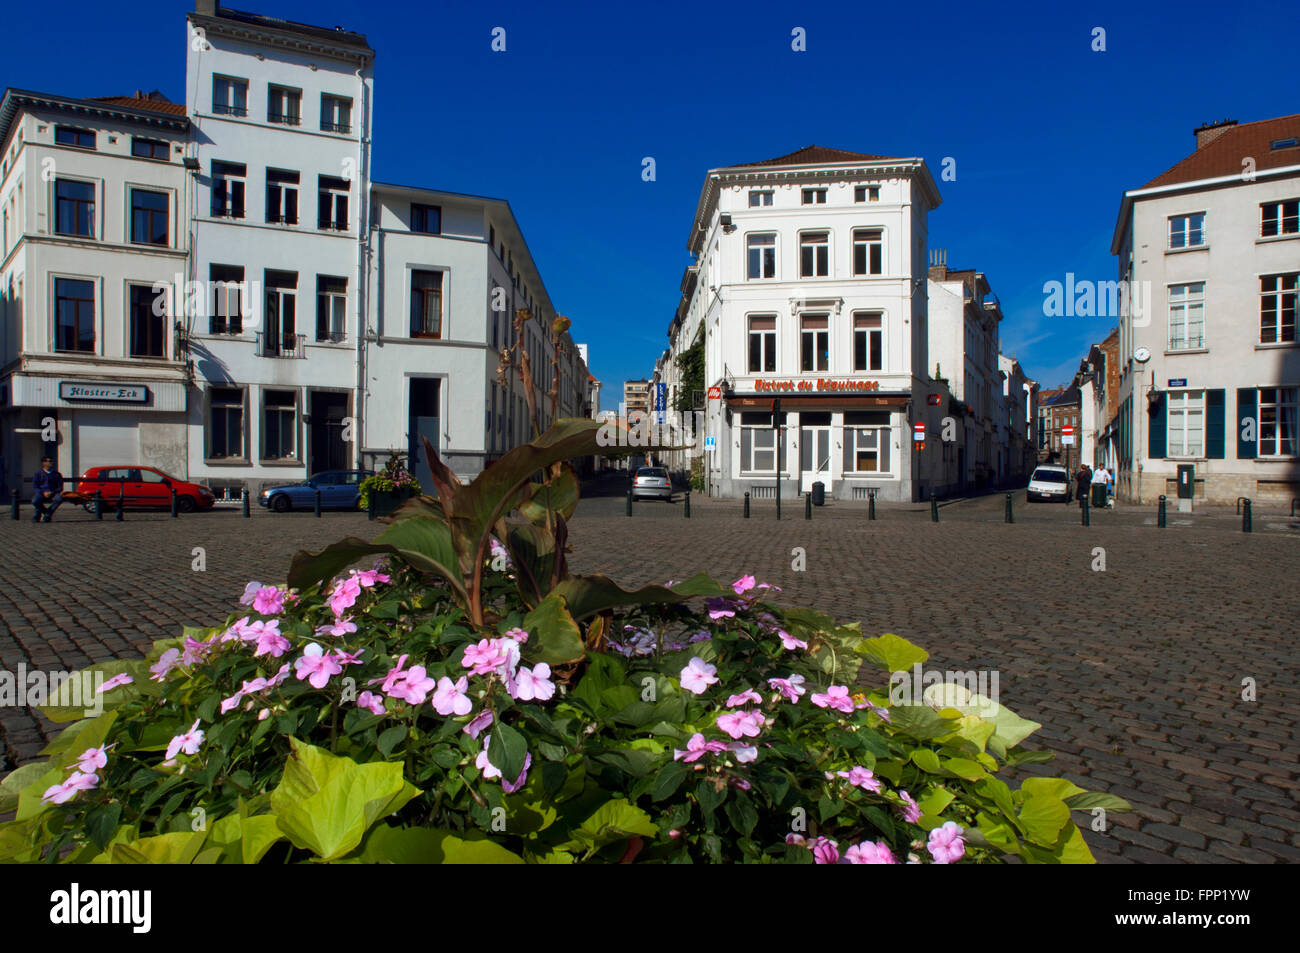 Place du Béguinage, Beguinage square, Brussels, Belgium. St Cathérine neighborhood. Square located next to the Église St Jean Ba Stock Photo